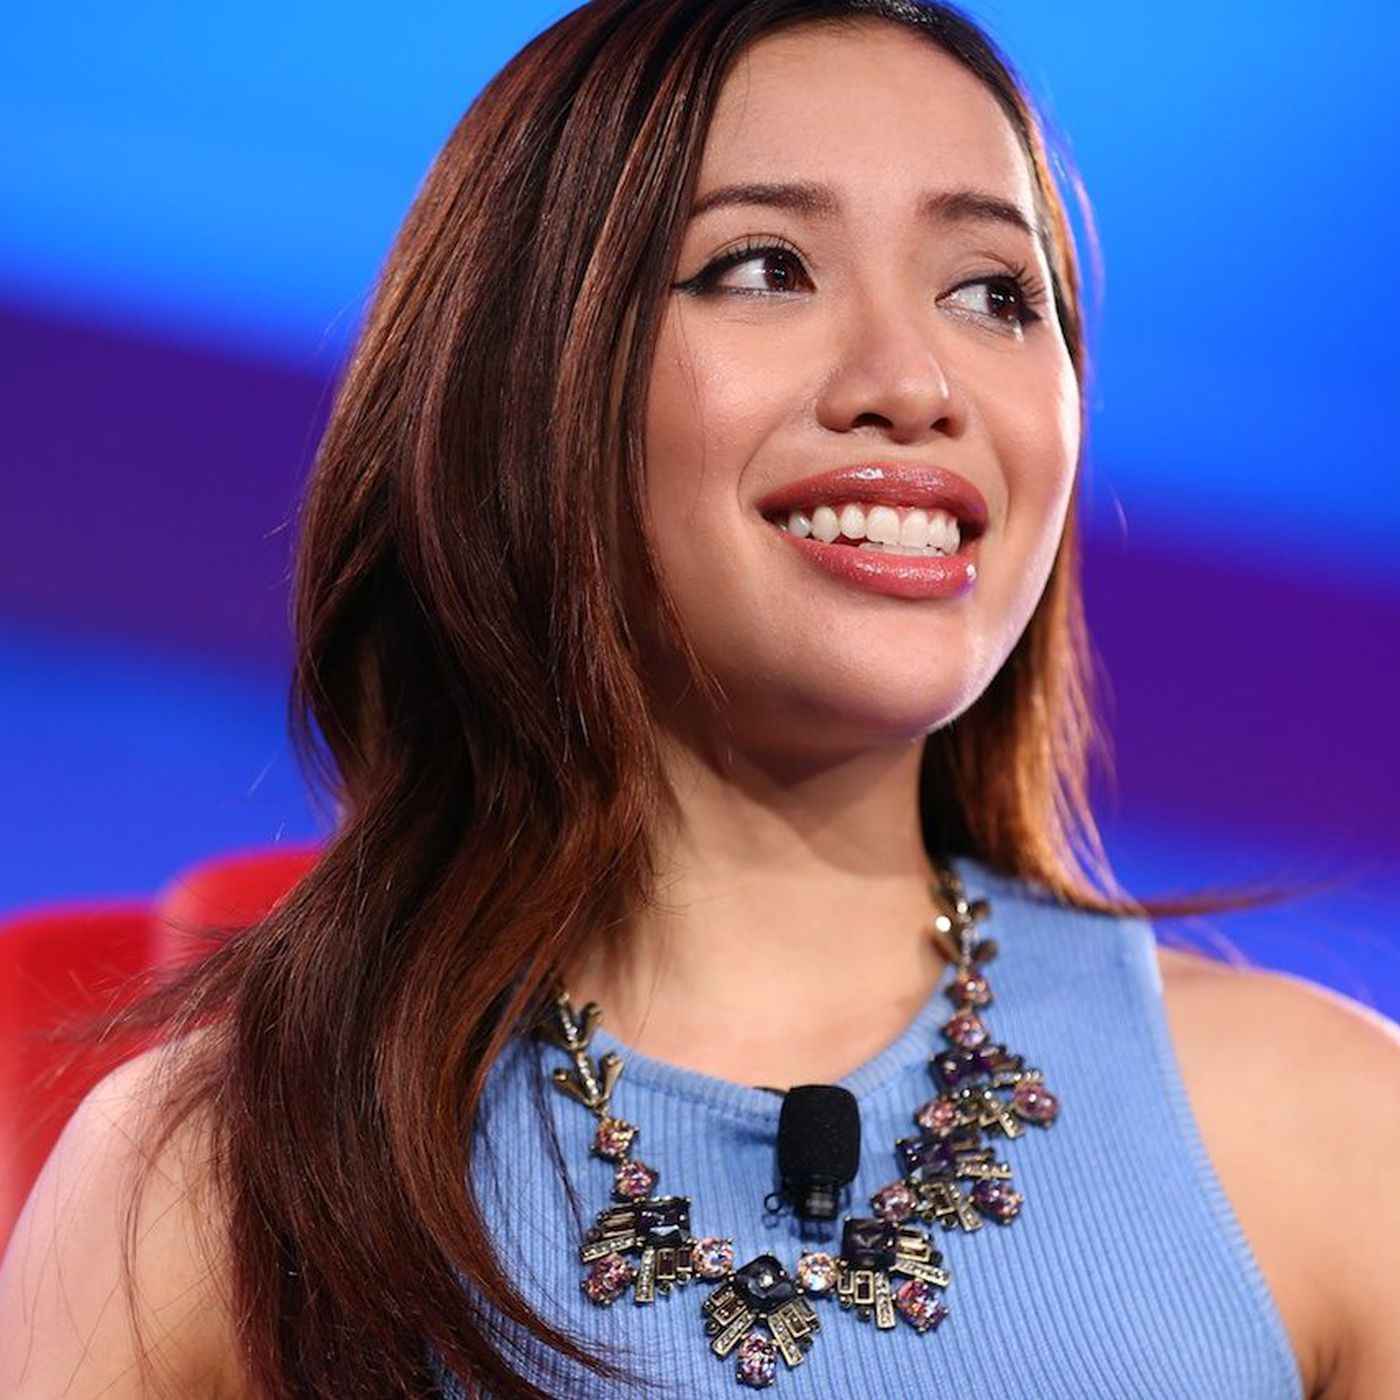 Michelle Phan: From YouTube Star to $84 Million Startup Founder - Vox